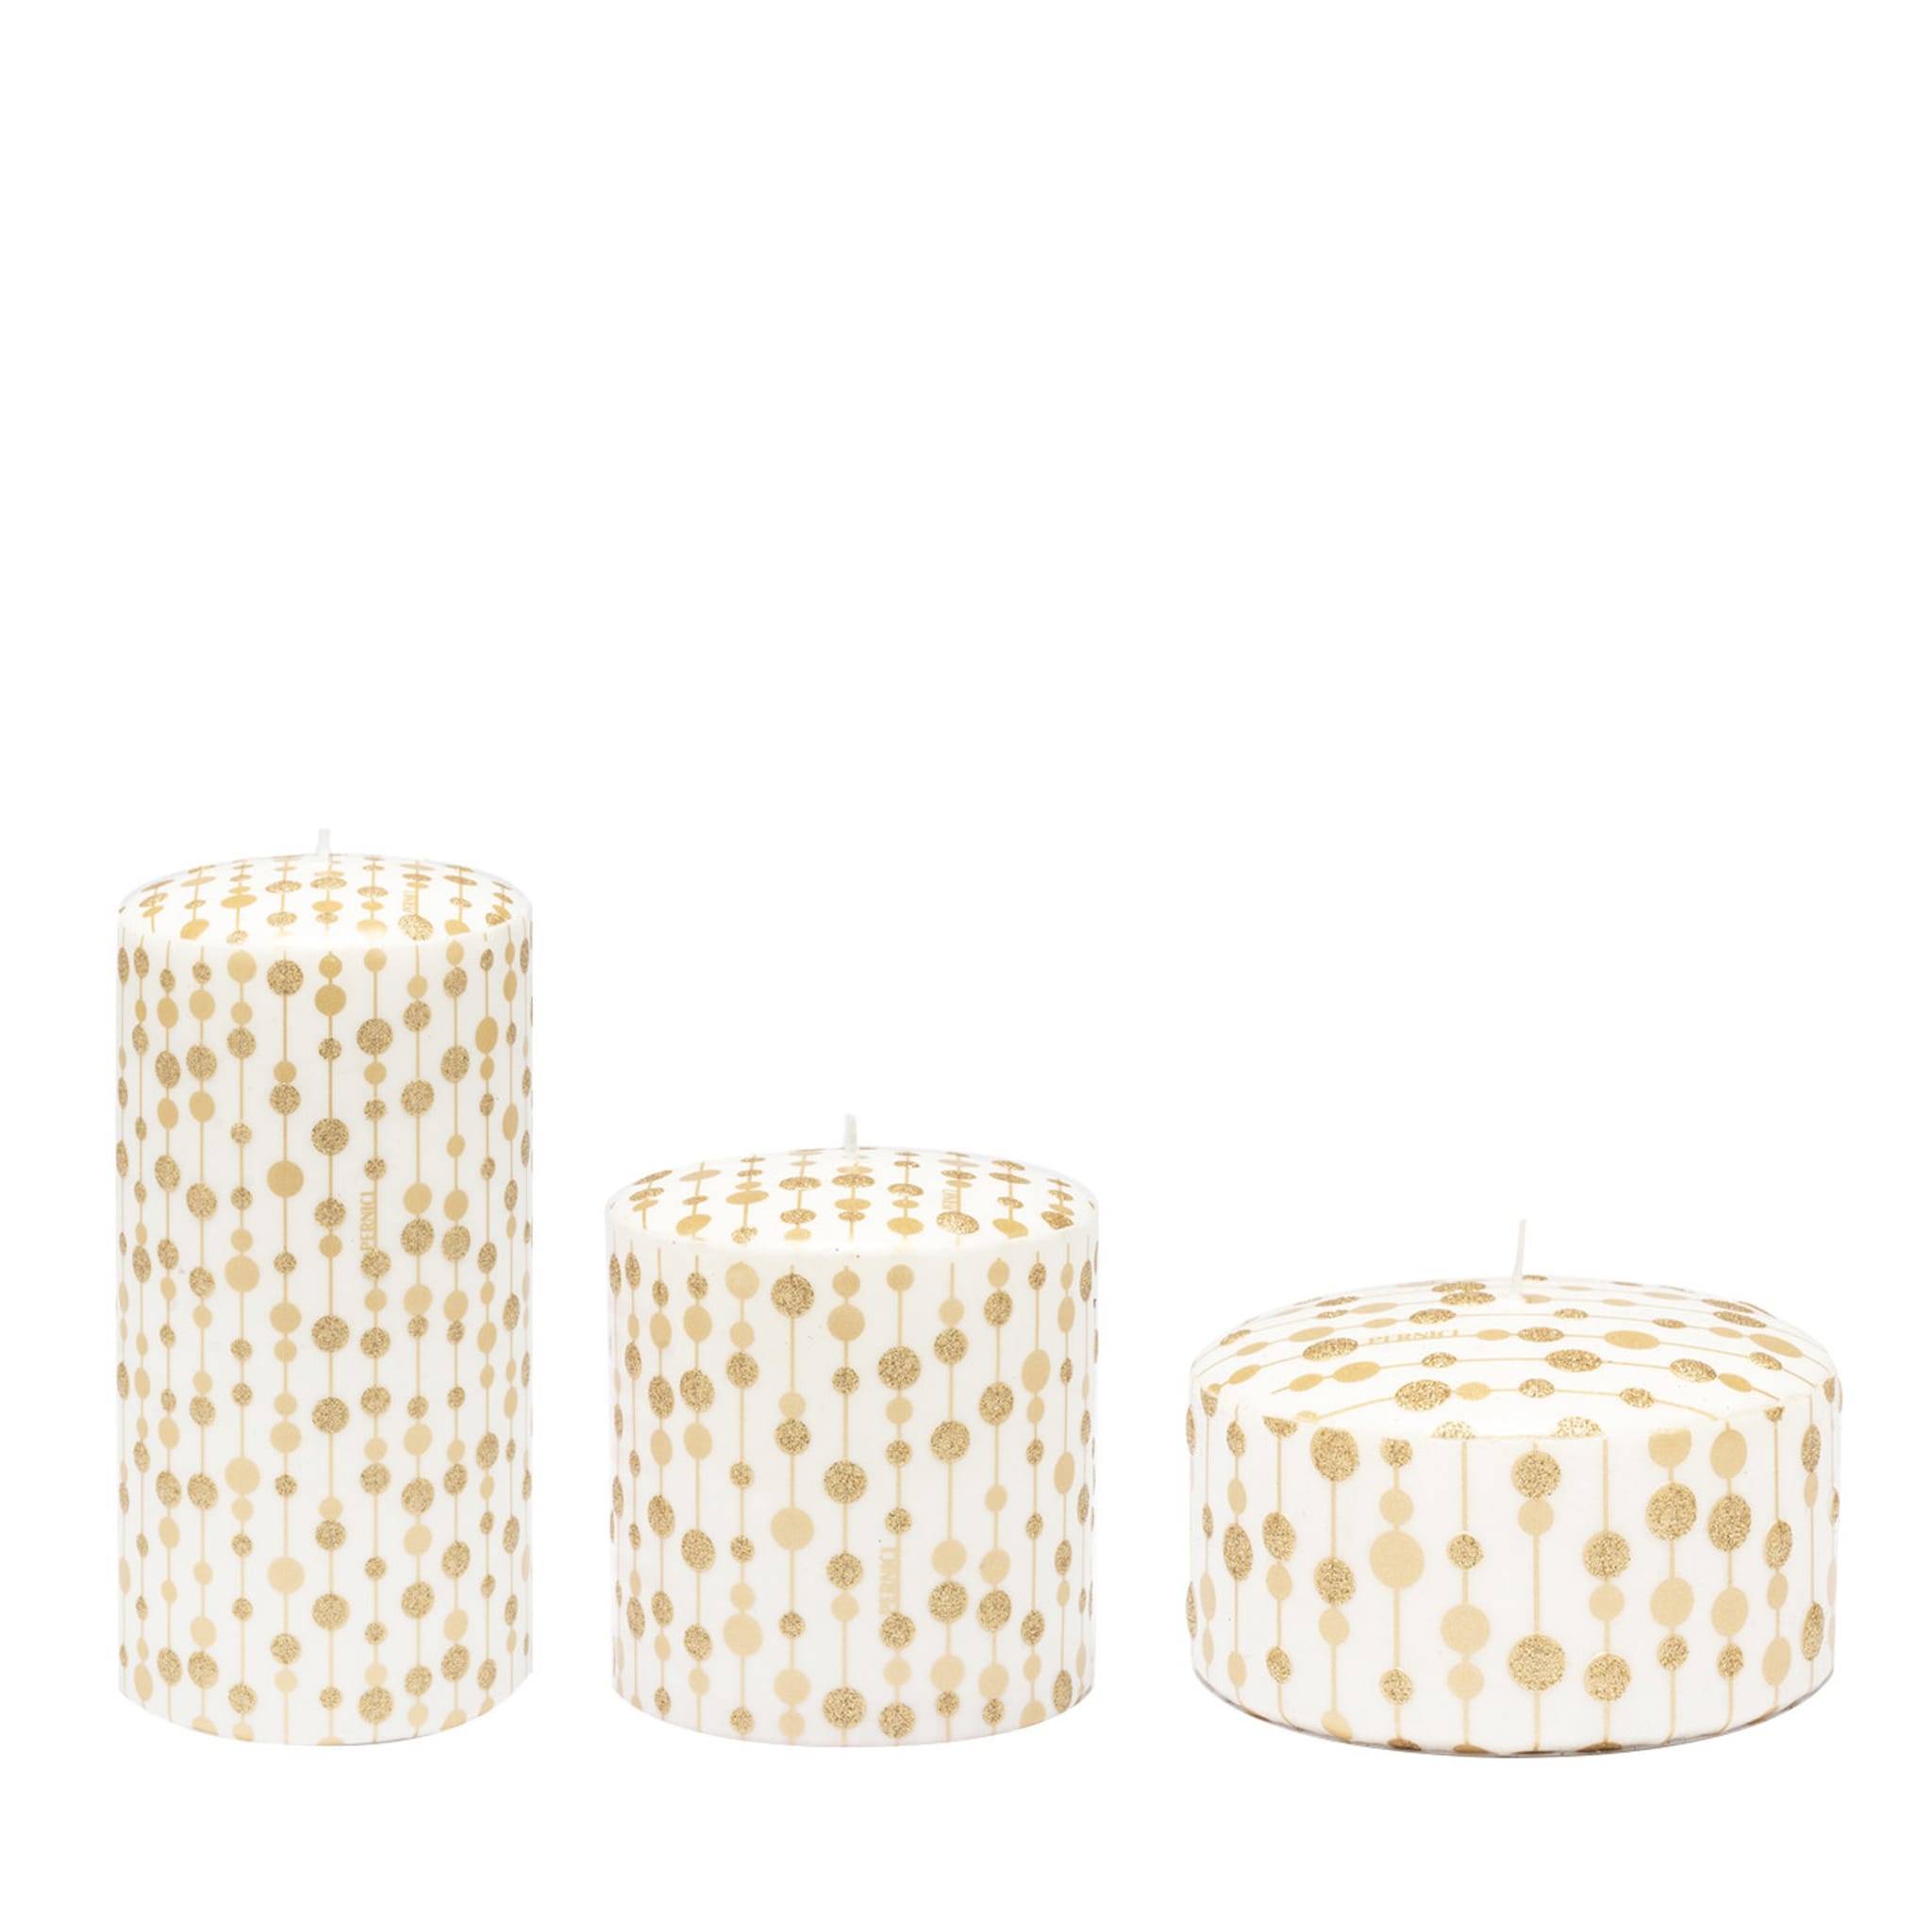 Pois Set of 3 Gold and Beige Candles - Main view